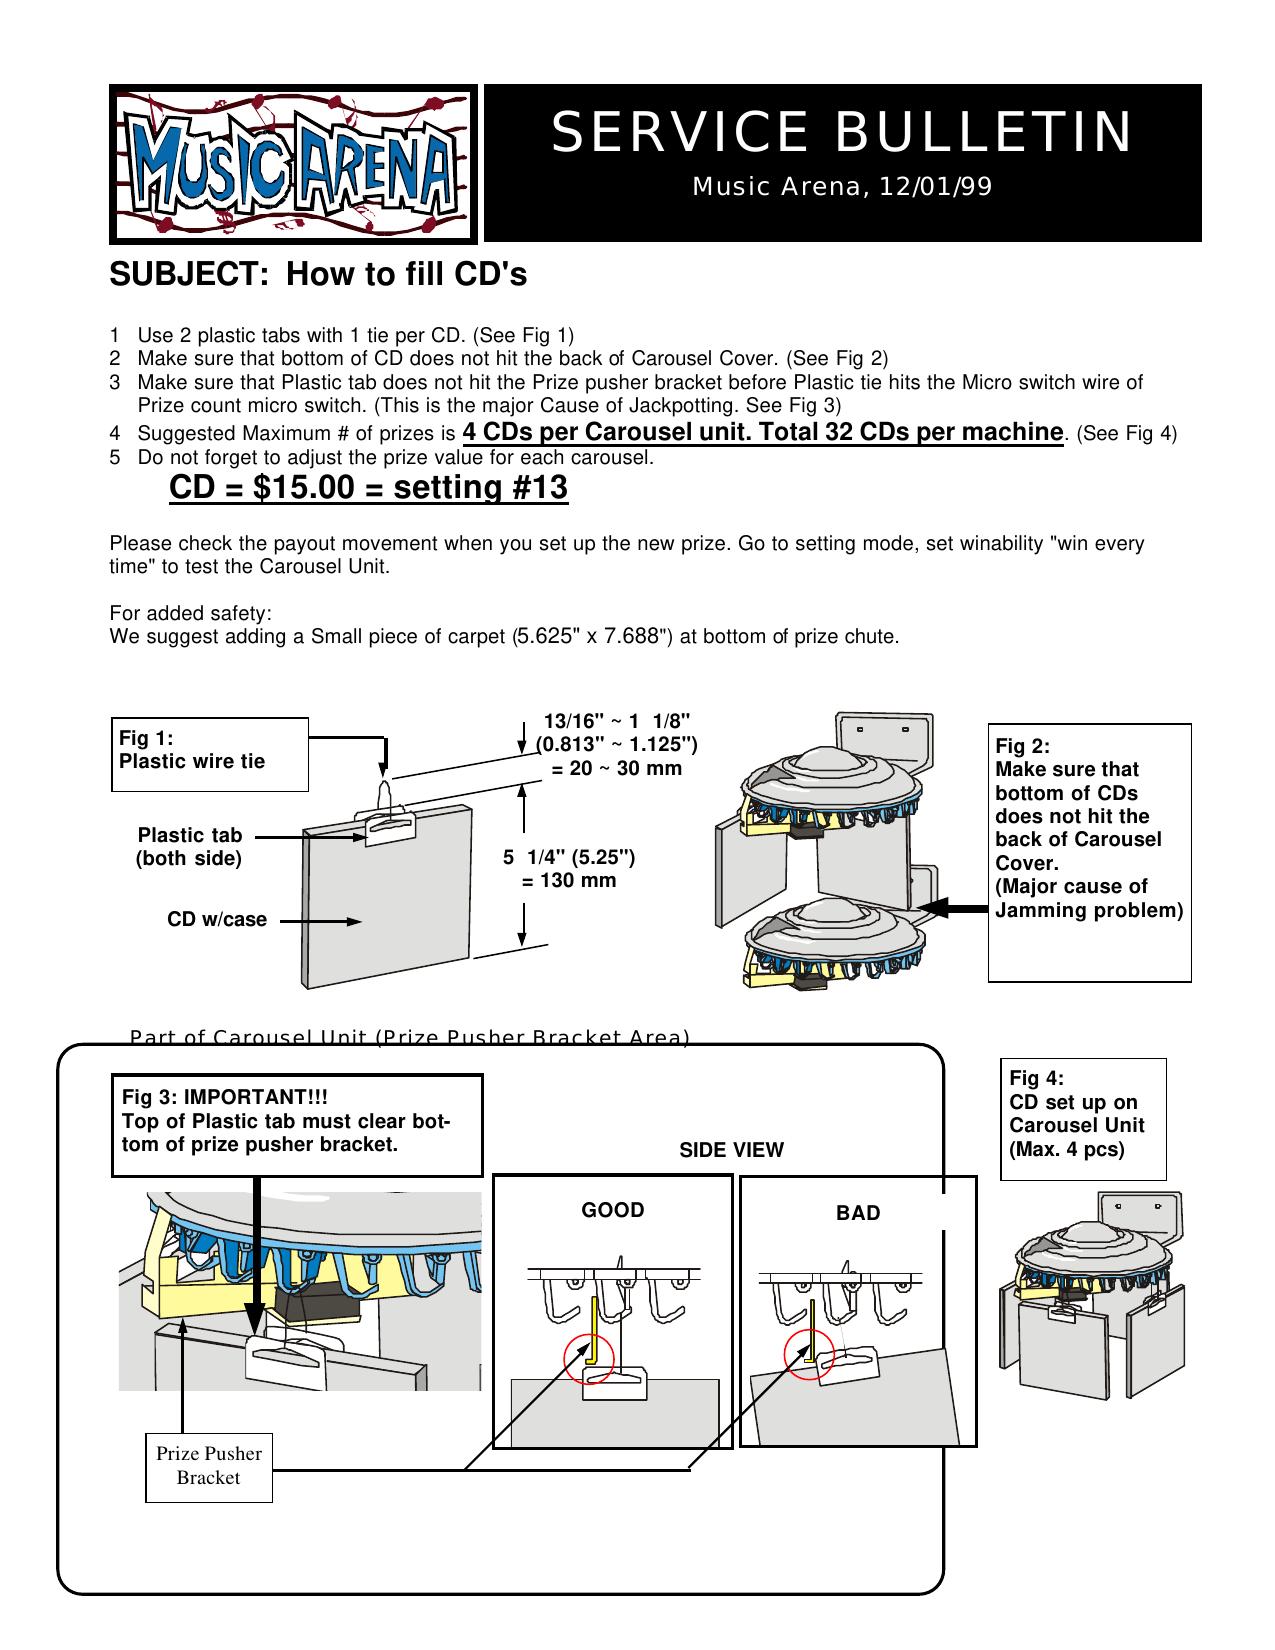 120199 How to set up CD (1 page).pub